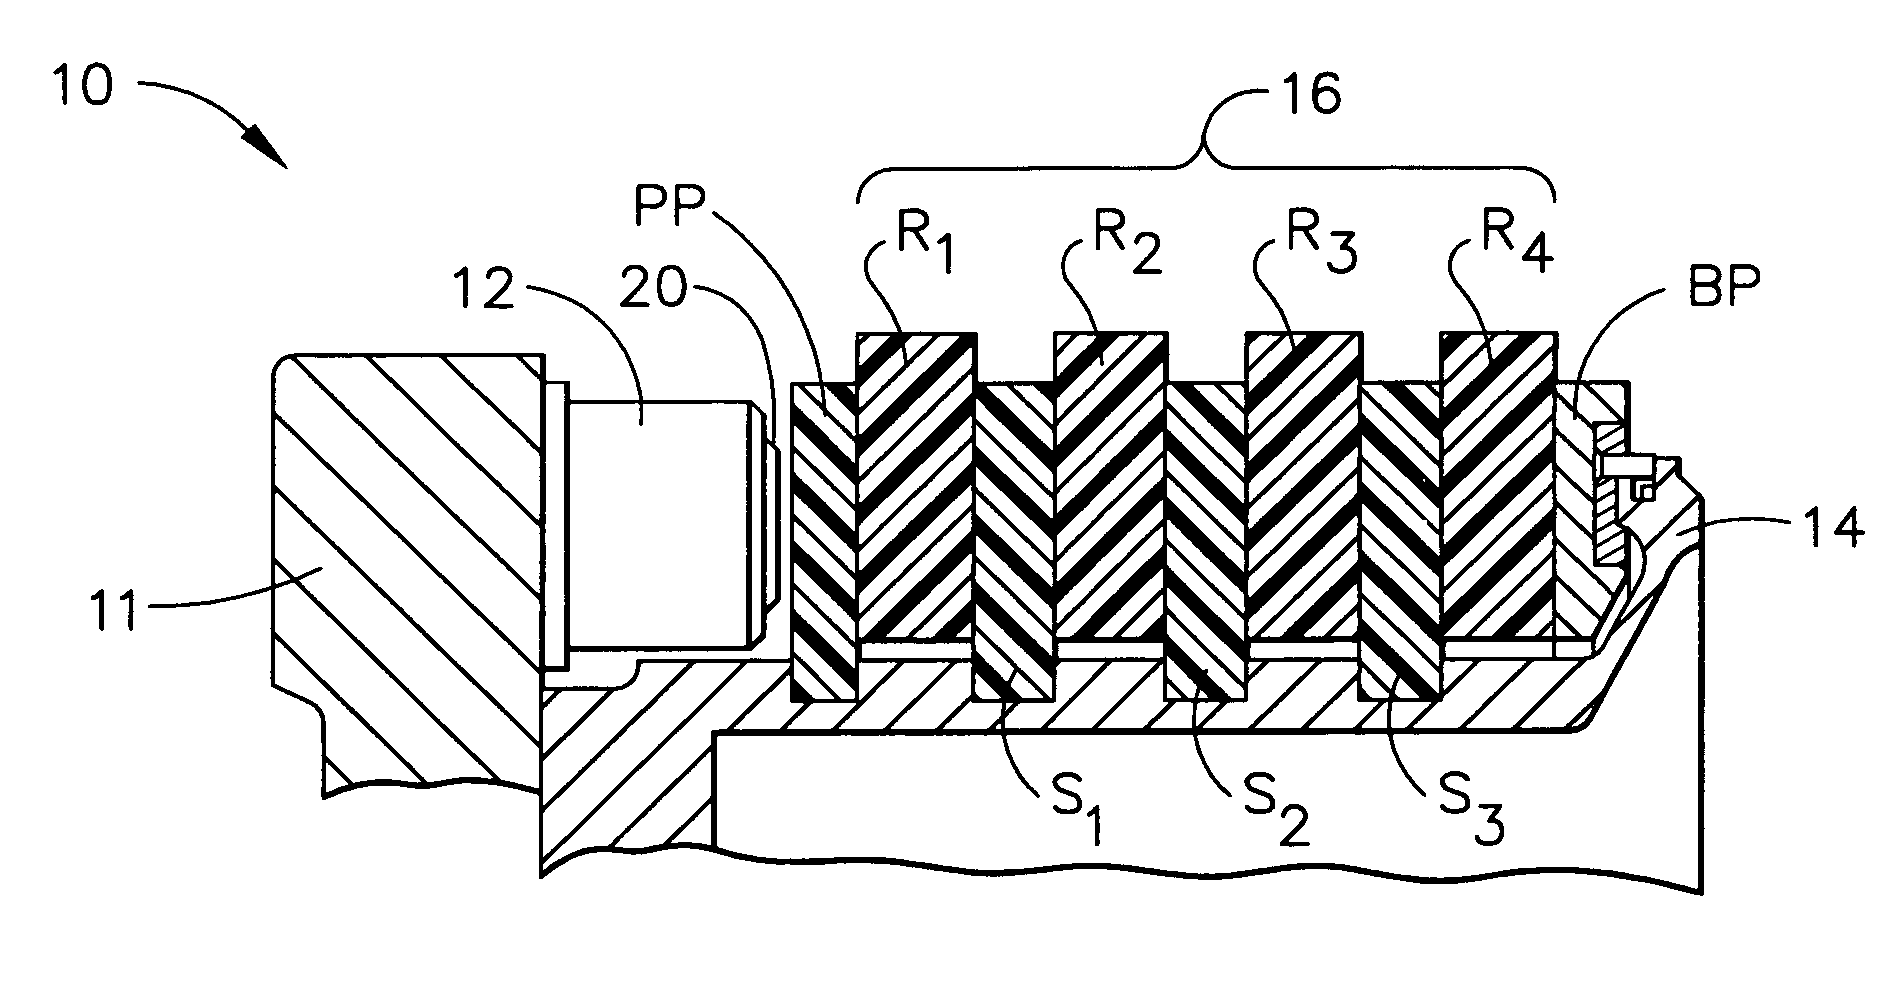 Method of increasing friction material utilization for carbon brakes